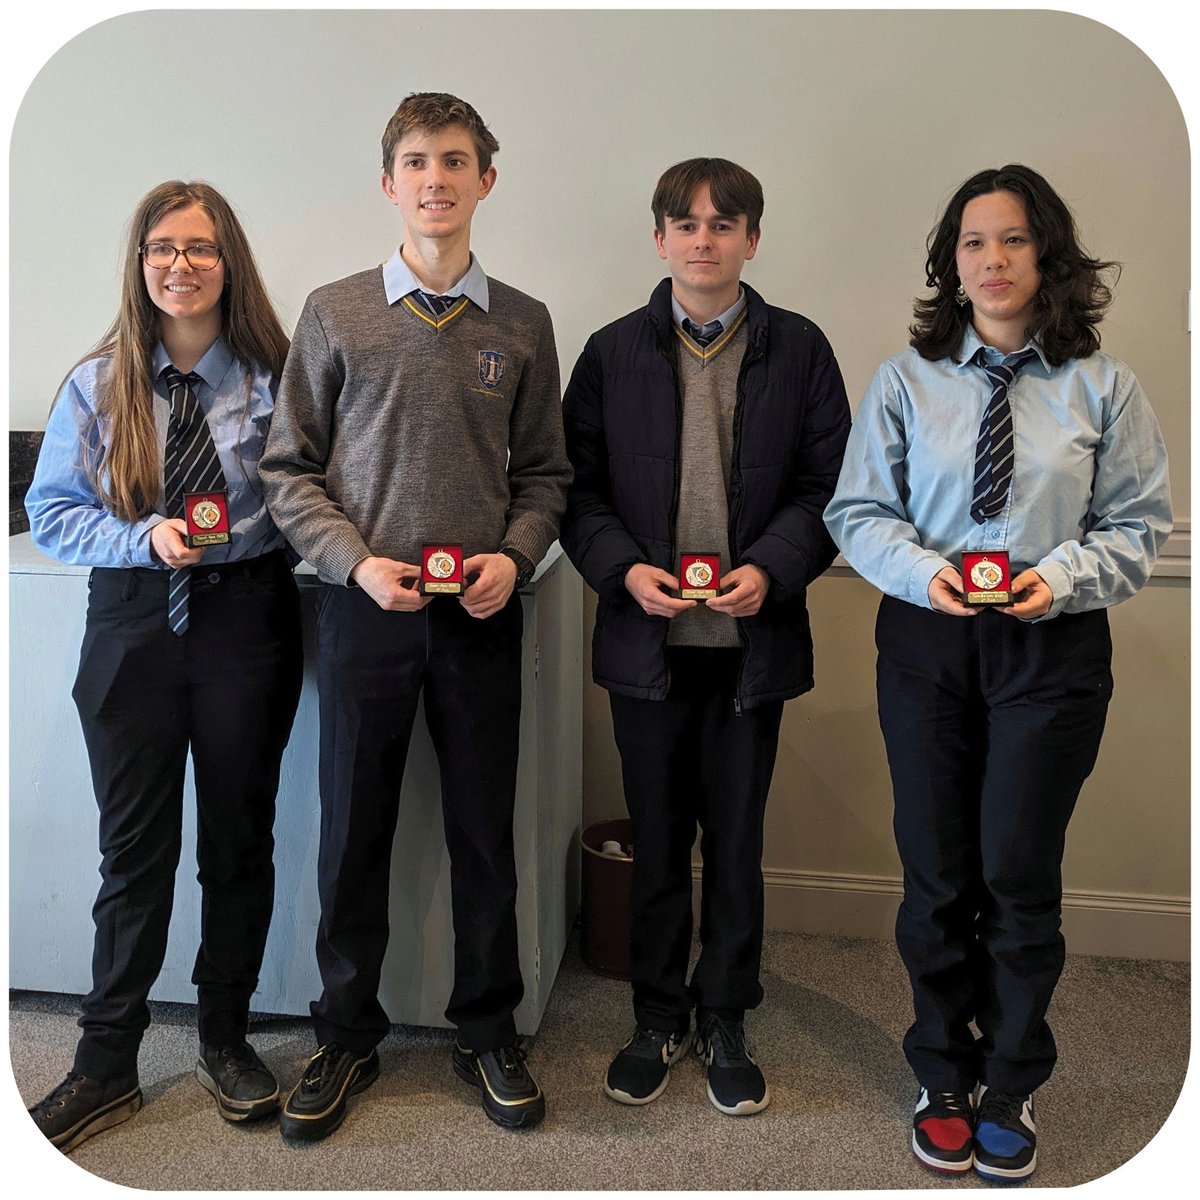 TCS's chess club recently attended the national ChessZ tournament in Nenagh, where they competed against other schools from across the country. We had four teams participating in the competition. All students demonstrated great skill & performed very well.